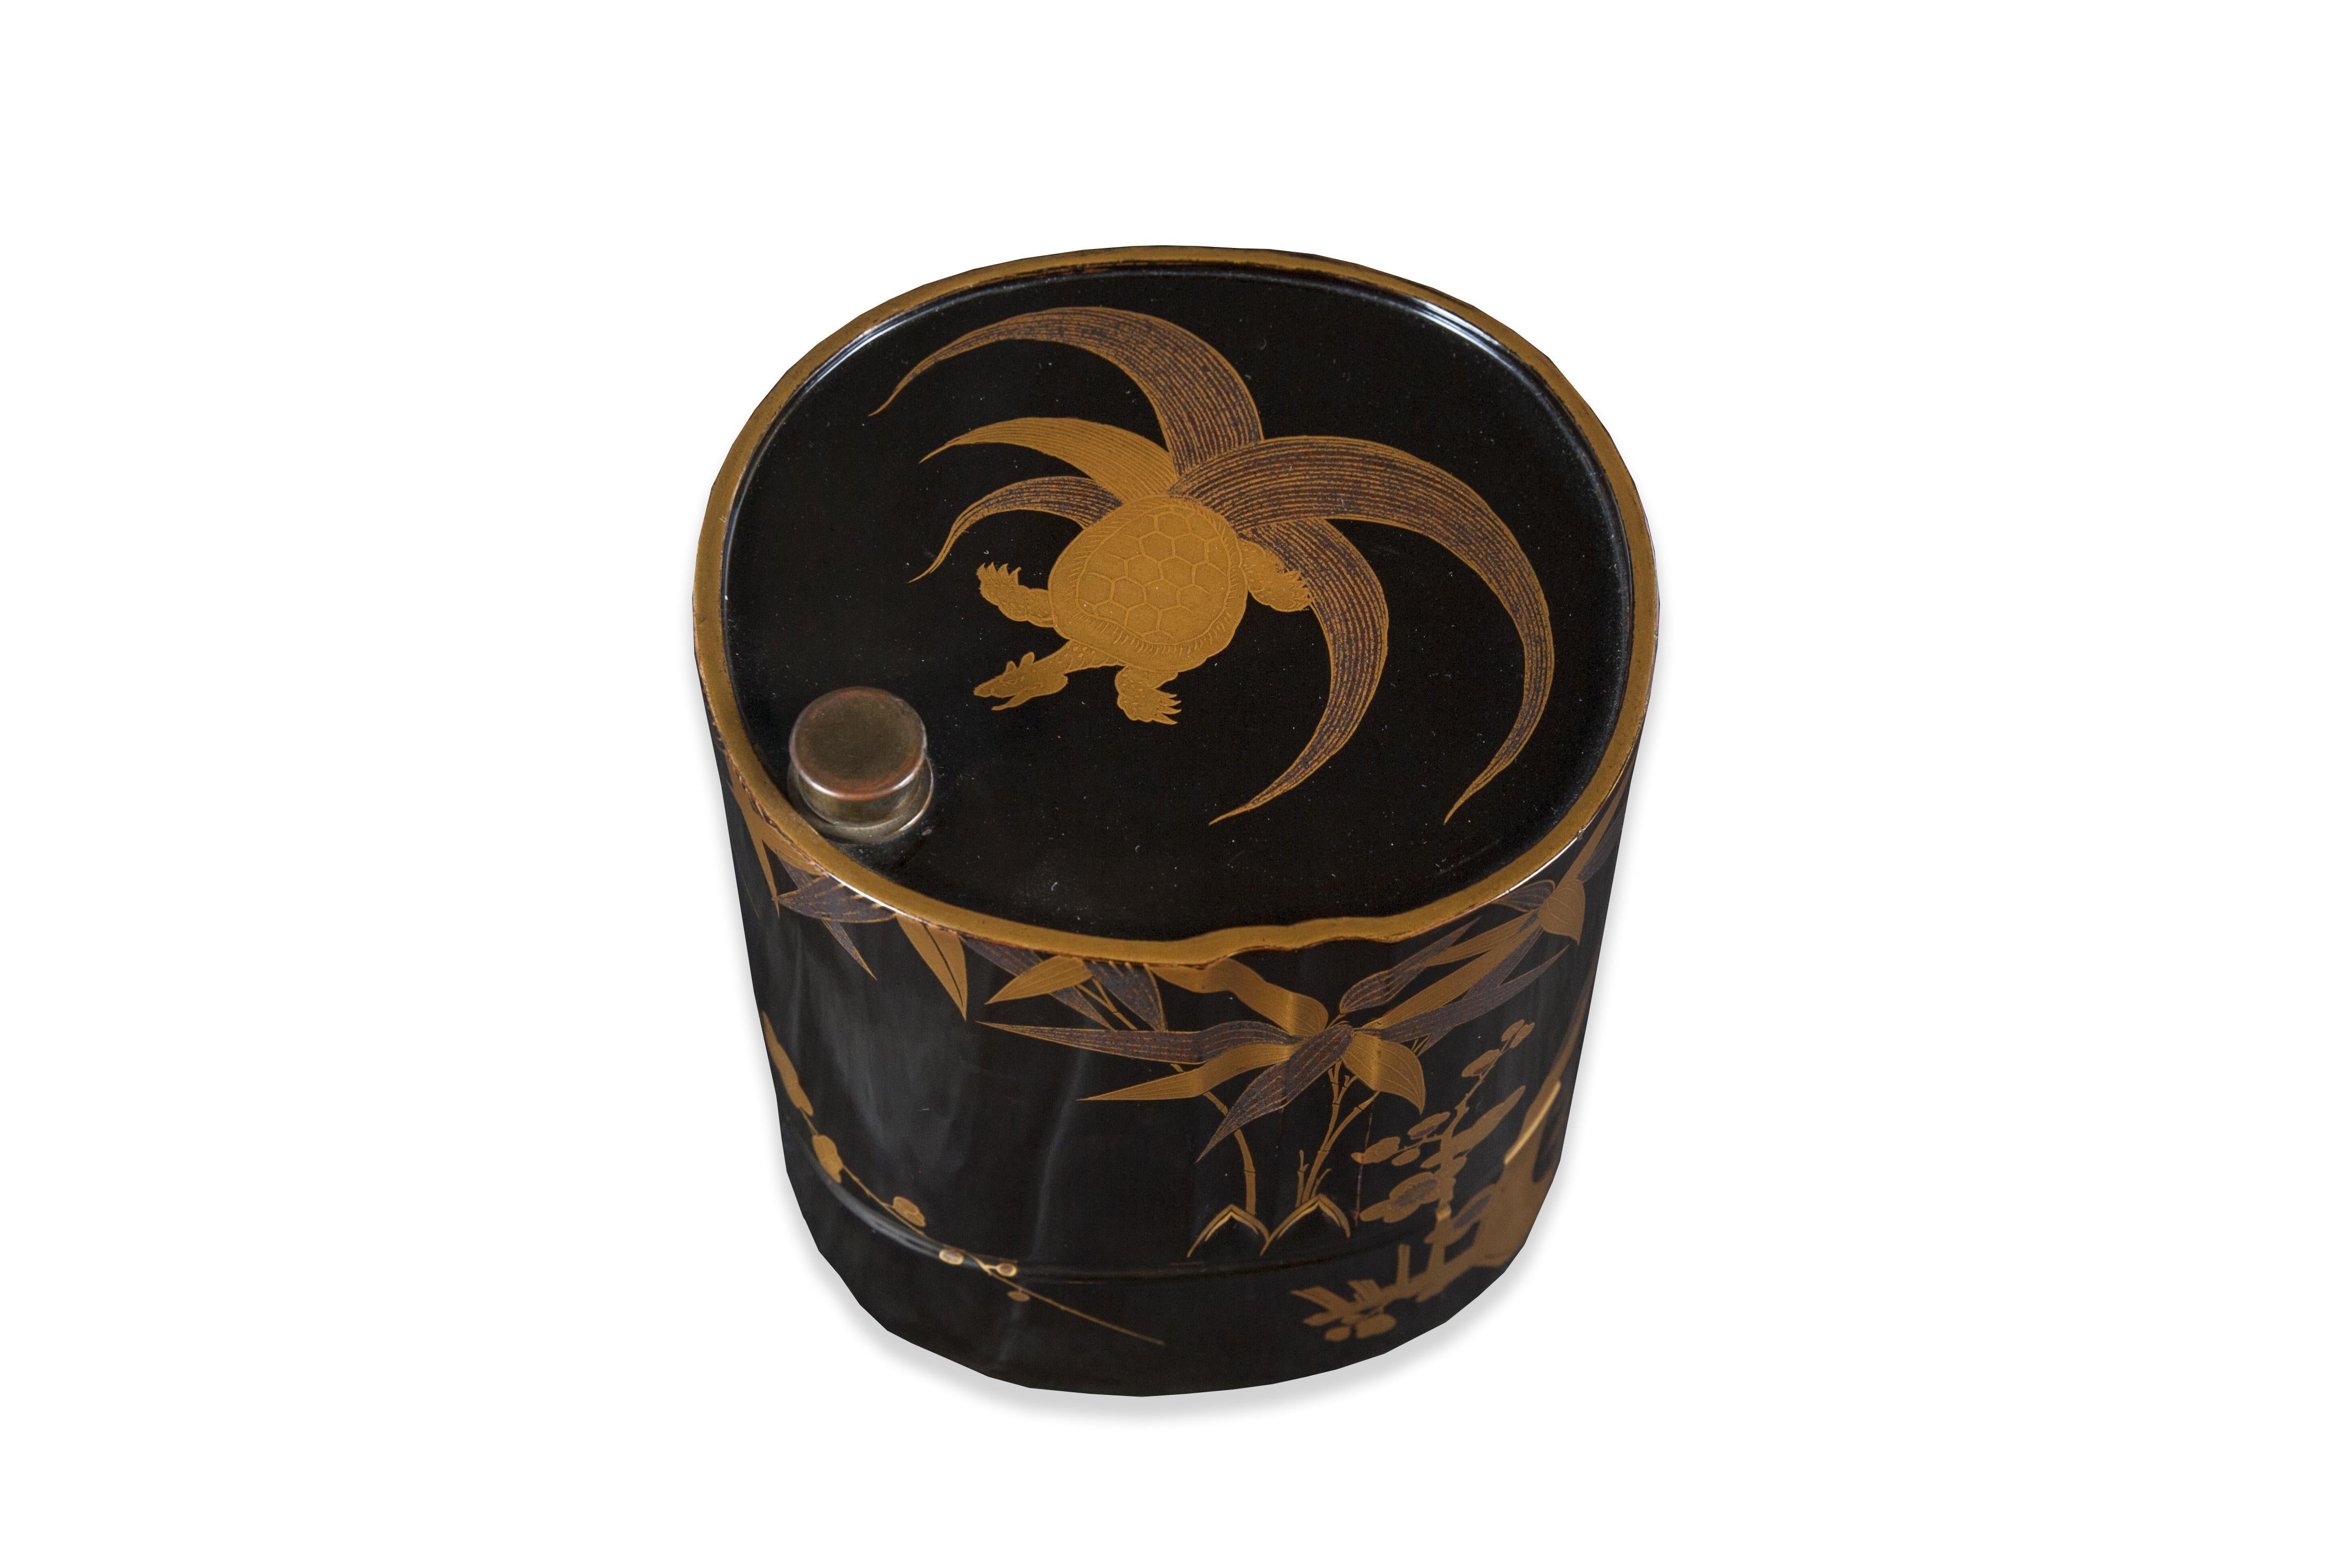 Fine Japanese Black and Gold Lacquer Sageju-Bako - Picnic Box For Sale 4